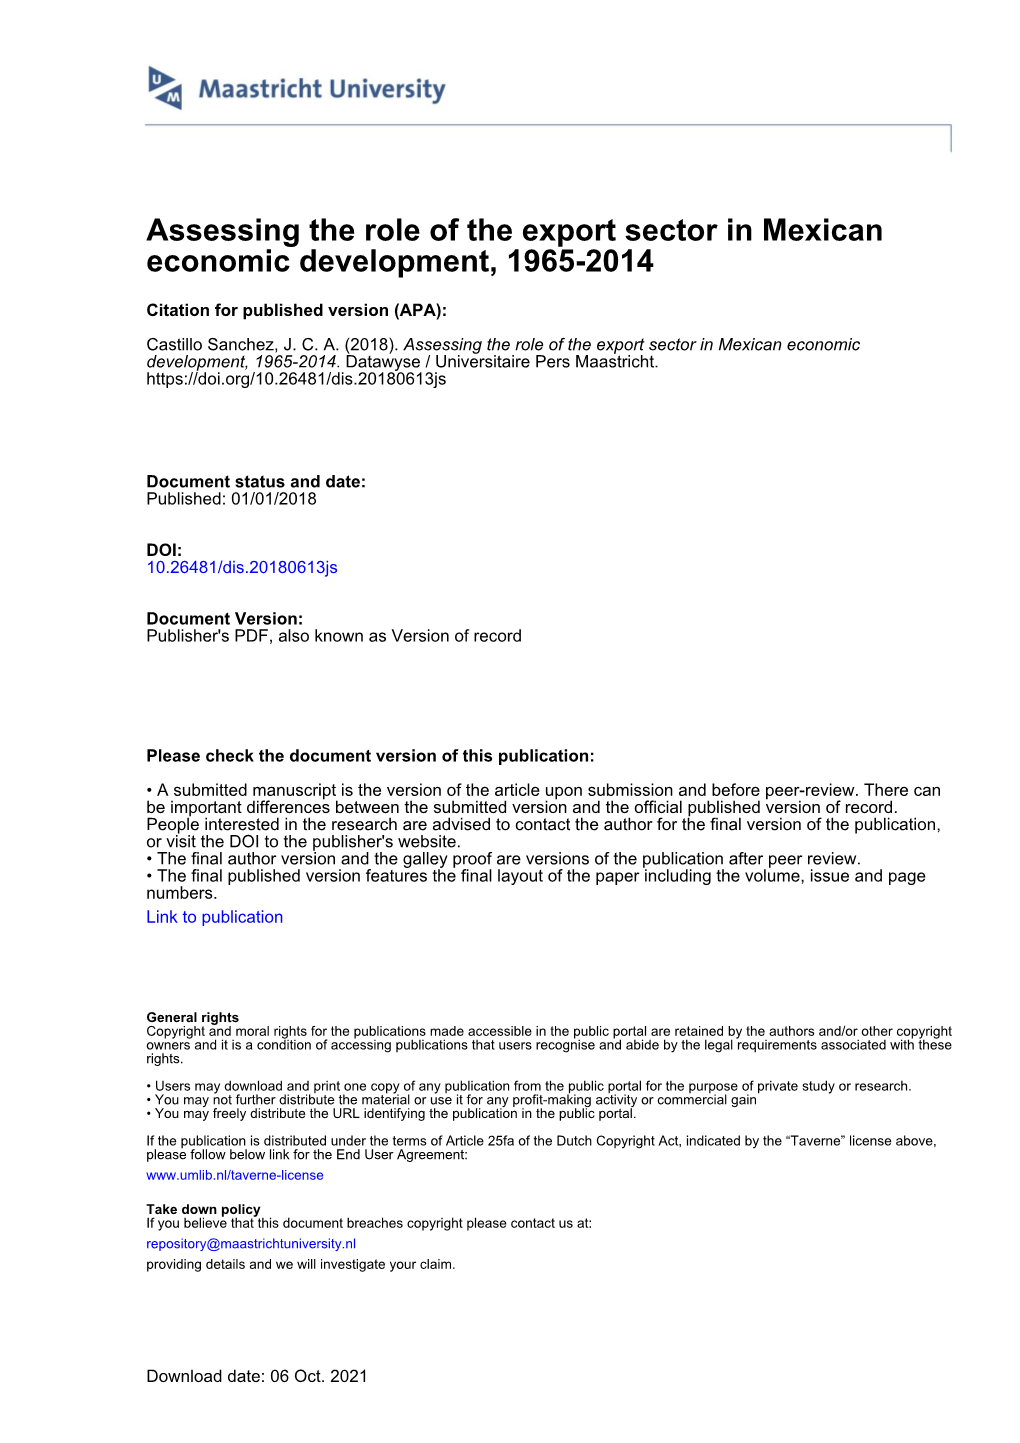 Assessing the Role of the Export Sector in Mexican Economic Development, 1965-2014